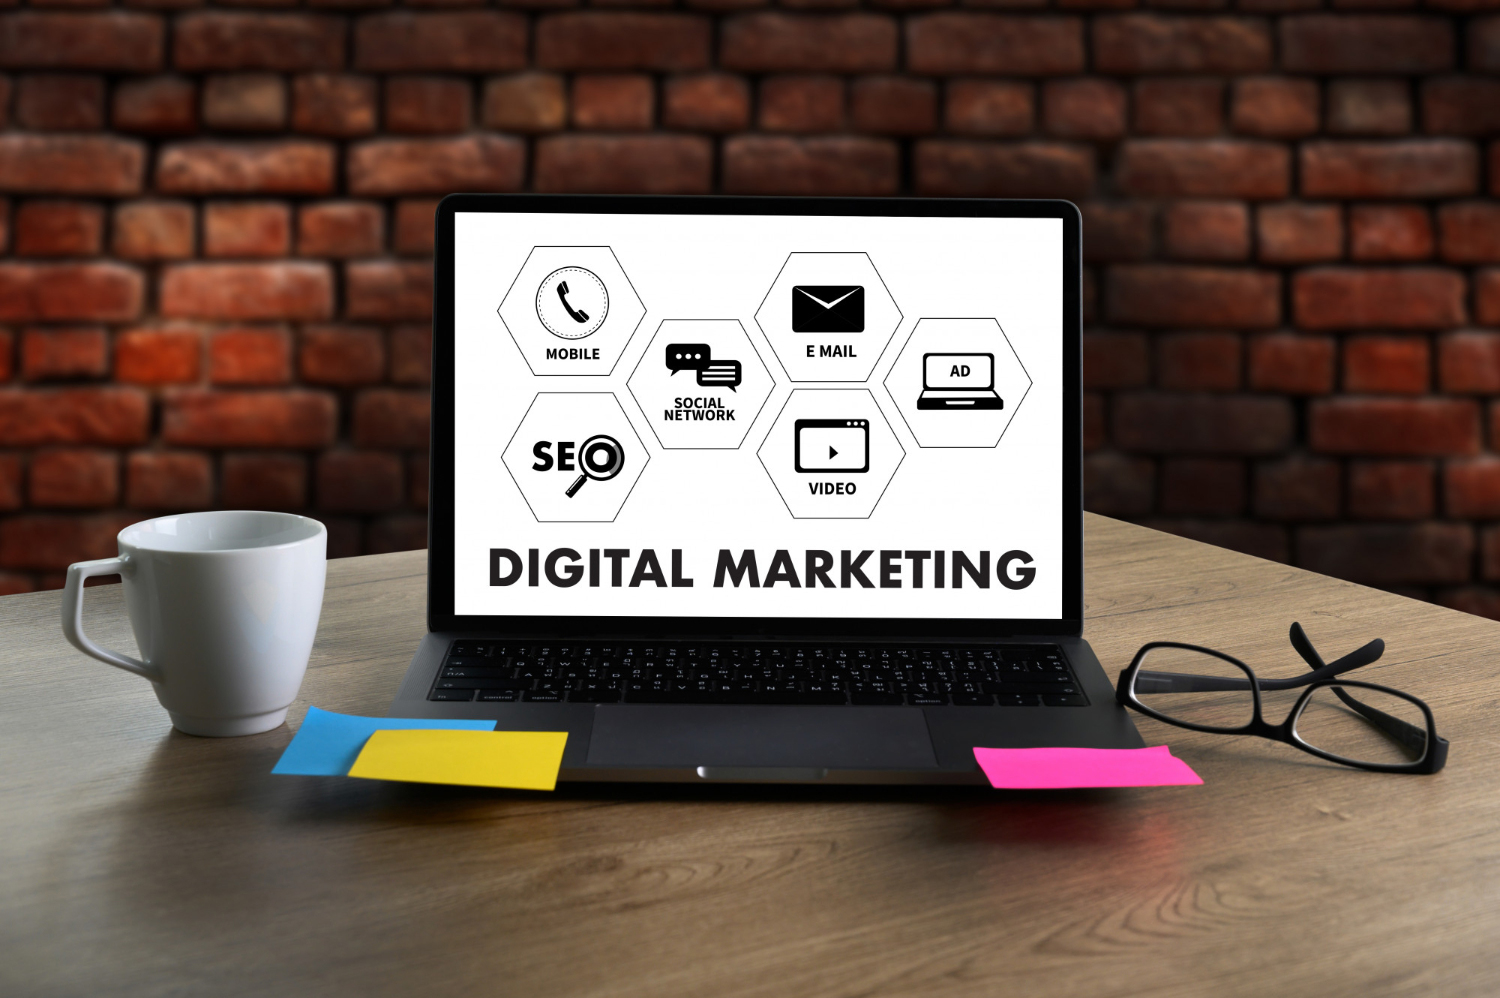 6 Digital Marketing Tools Every Marketer Should Know About